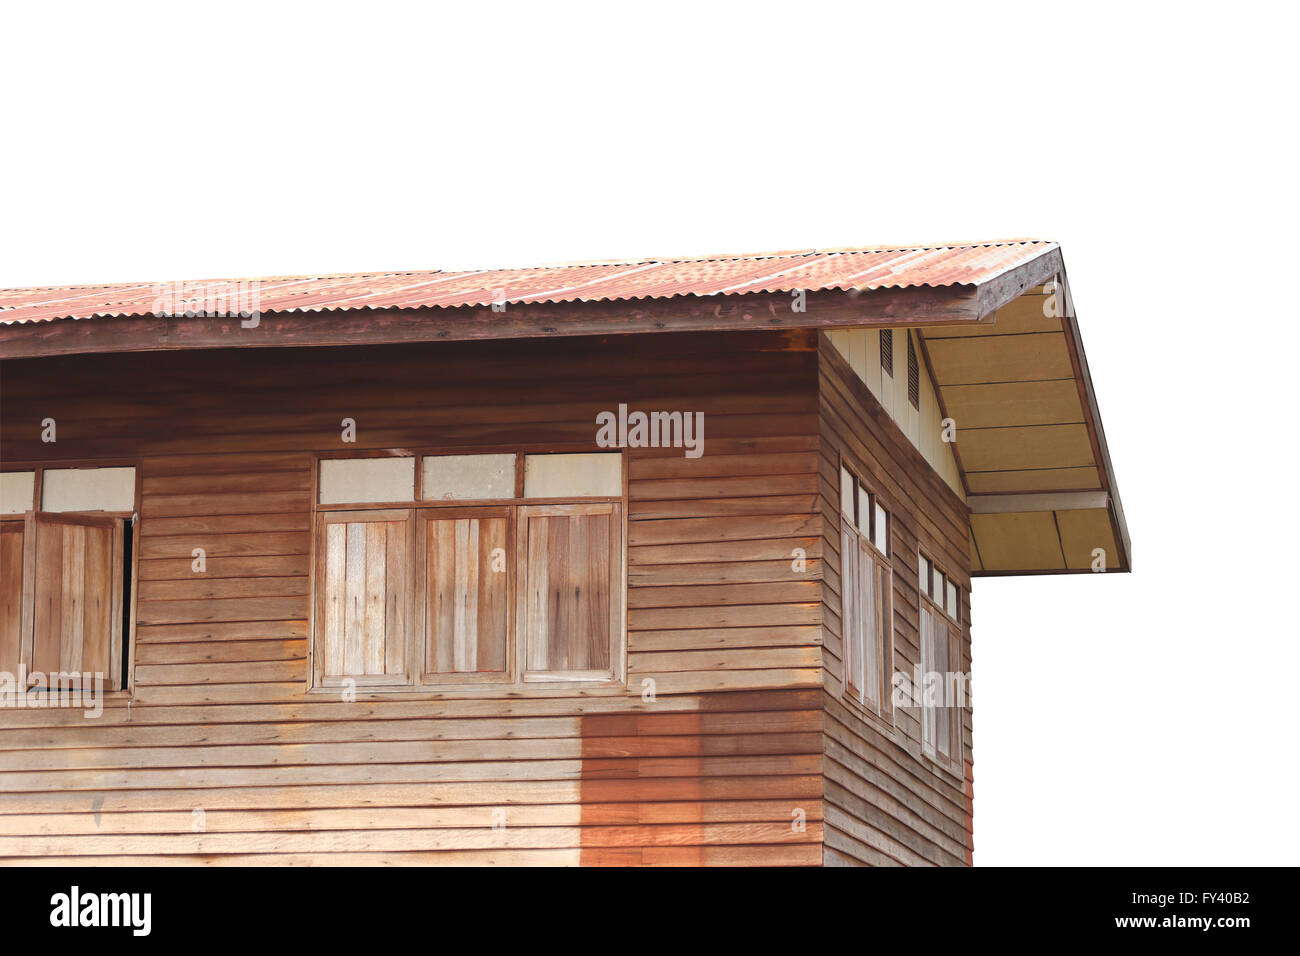 Old wooden house architectural style of Thailand design,and have clipping paths. Stock Photo